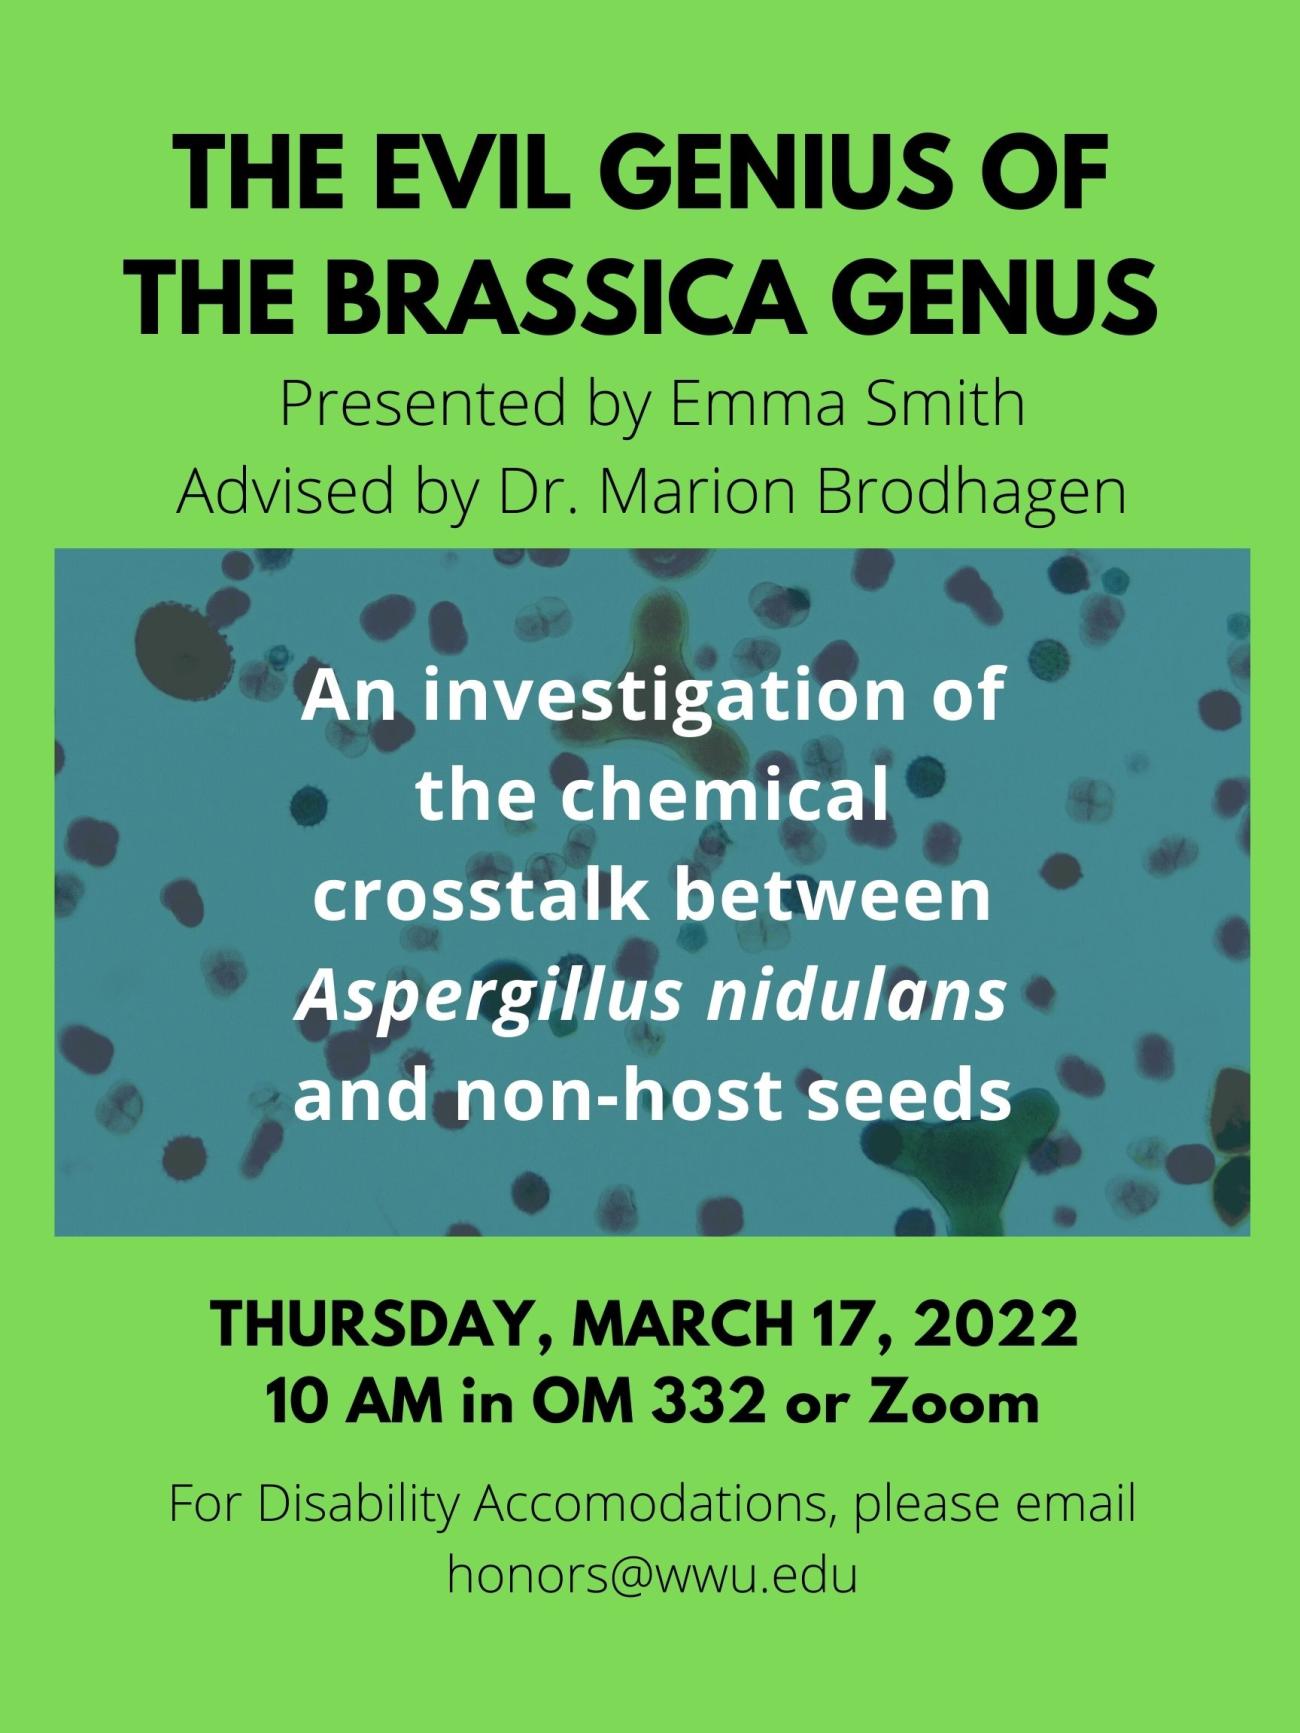 A poster with two dark green boxes on a blue background with bacterial cells randomly distributed around. The text reads: "The Evil Genius of the Brassica Genus, An investigation of the chemical cross-talk between A. nidulans and non-host seeds. A presentation by Emma Smith. Advisor: Dr. Marion Brodhagen. When: Thursday March 17th, 10-10:45 AM. Where: OM 332 or Zoom." 